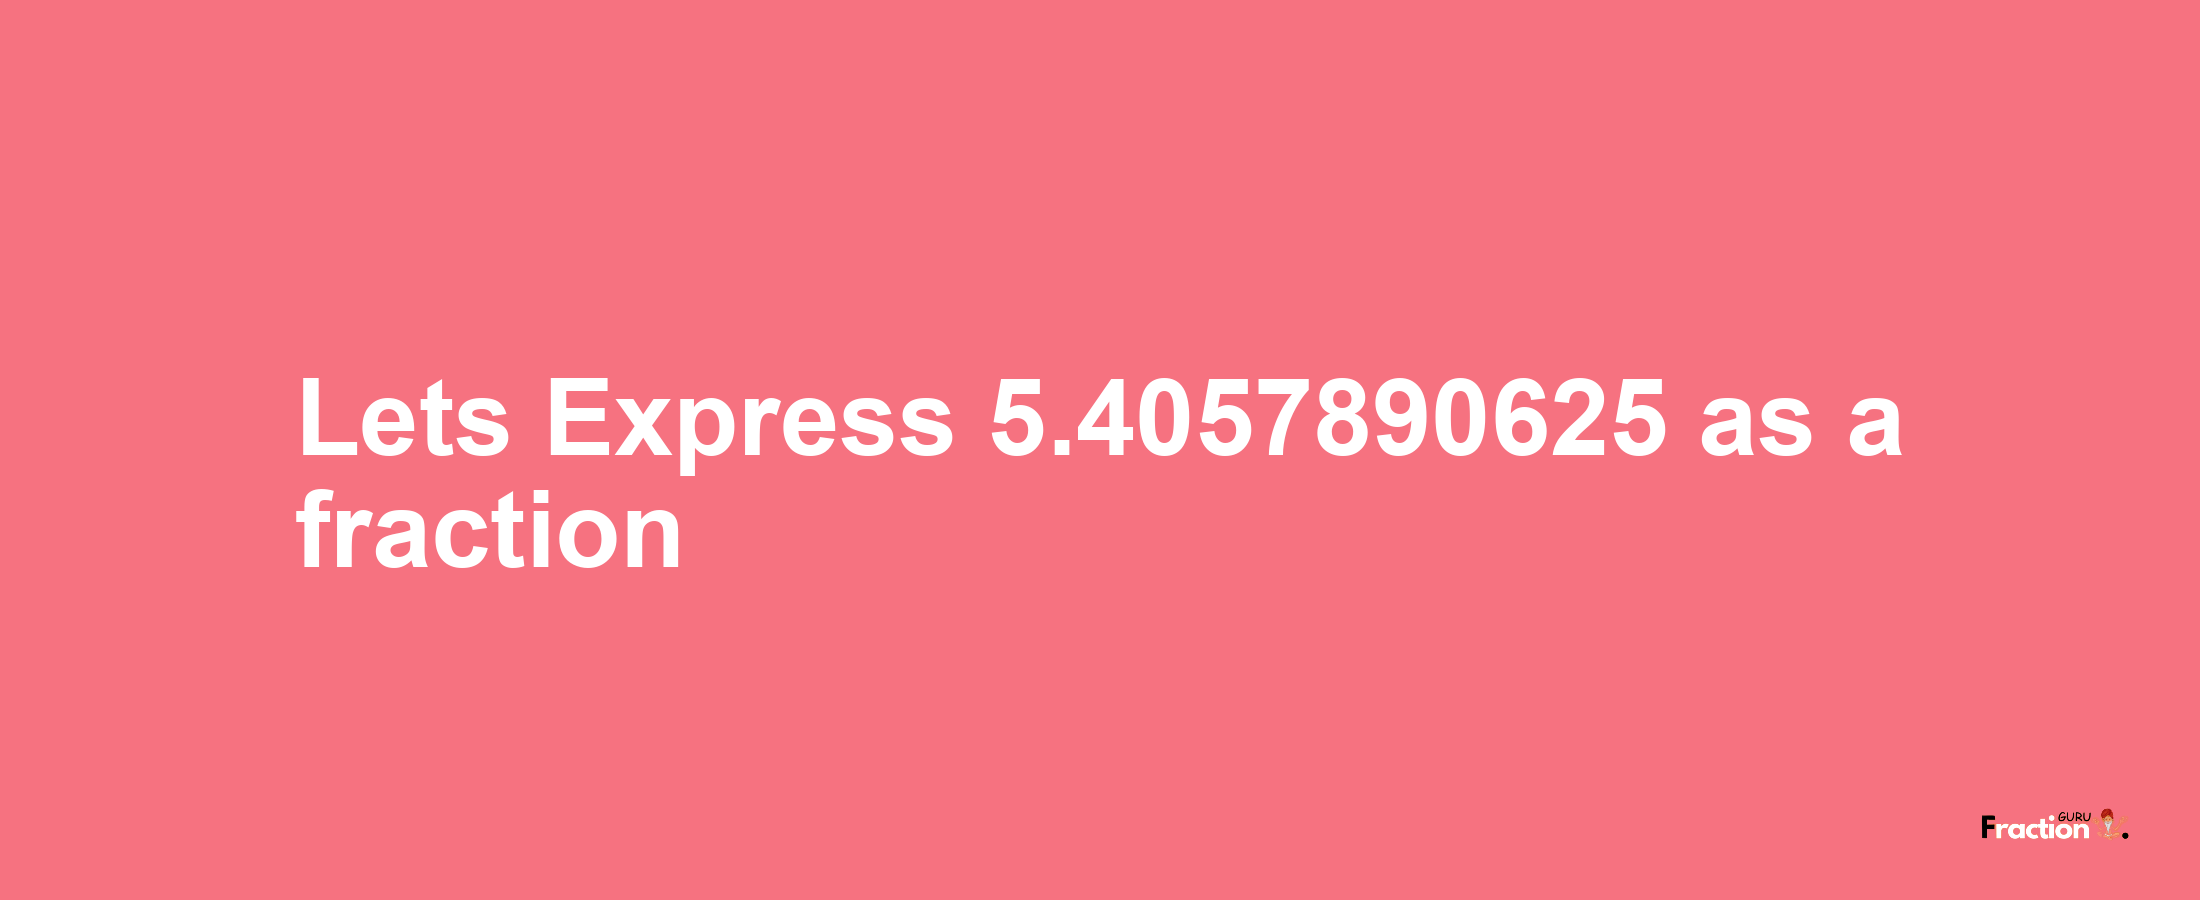 Lets Express 5.4057890625 as afraction